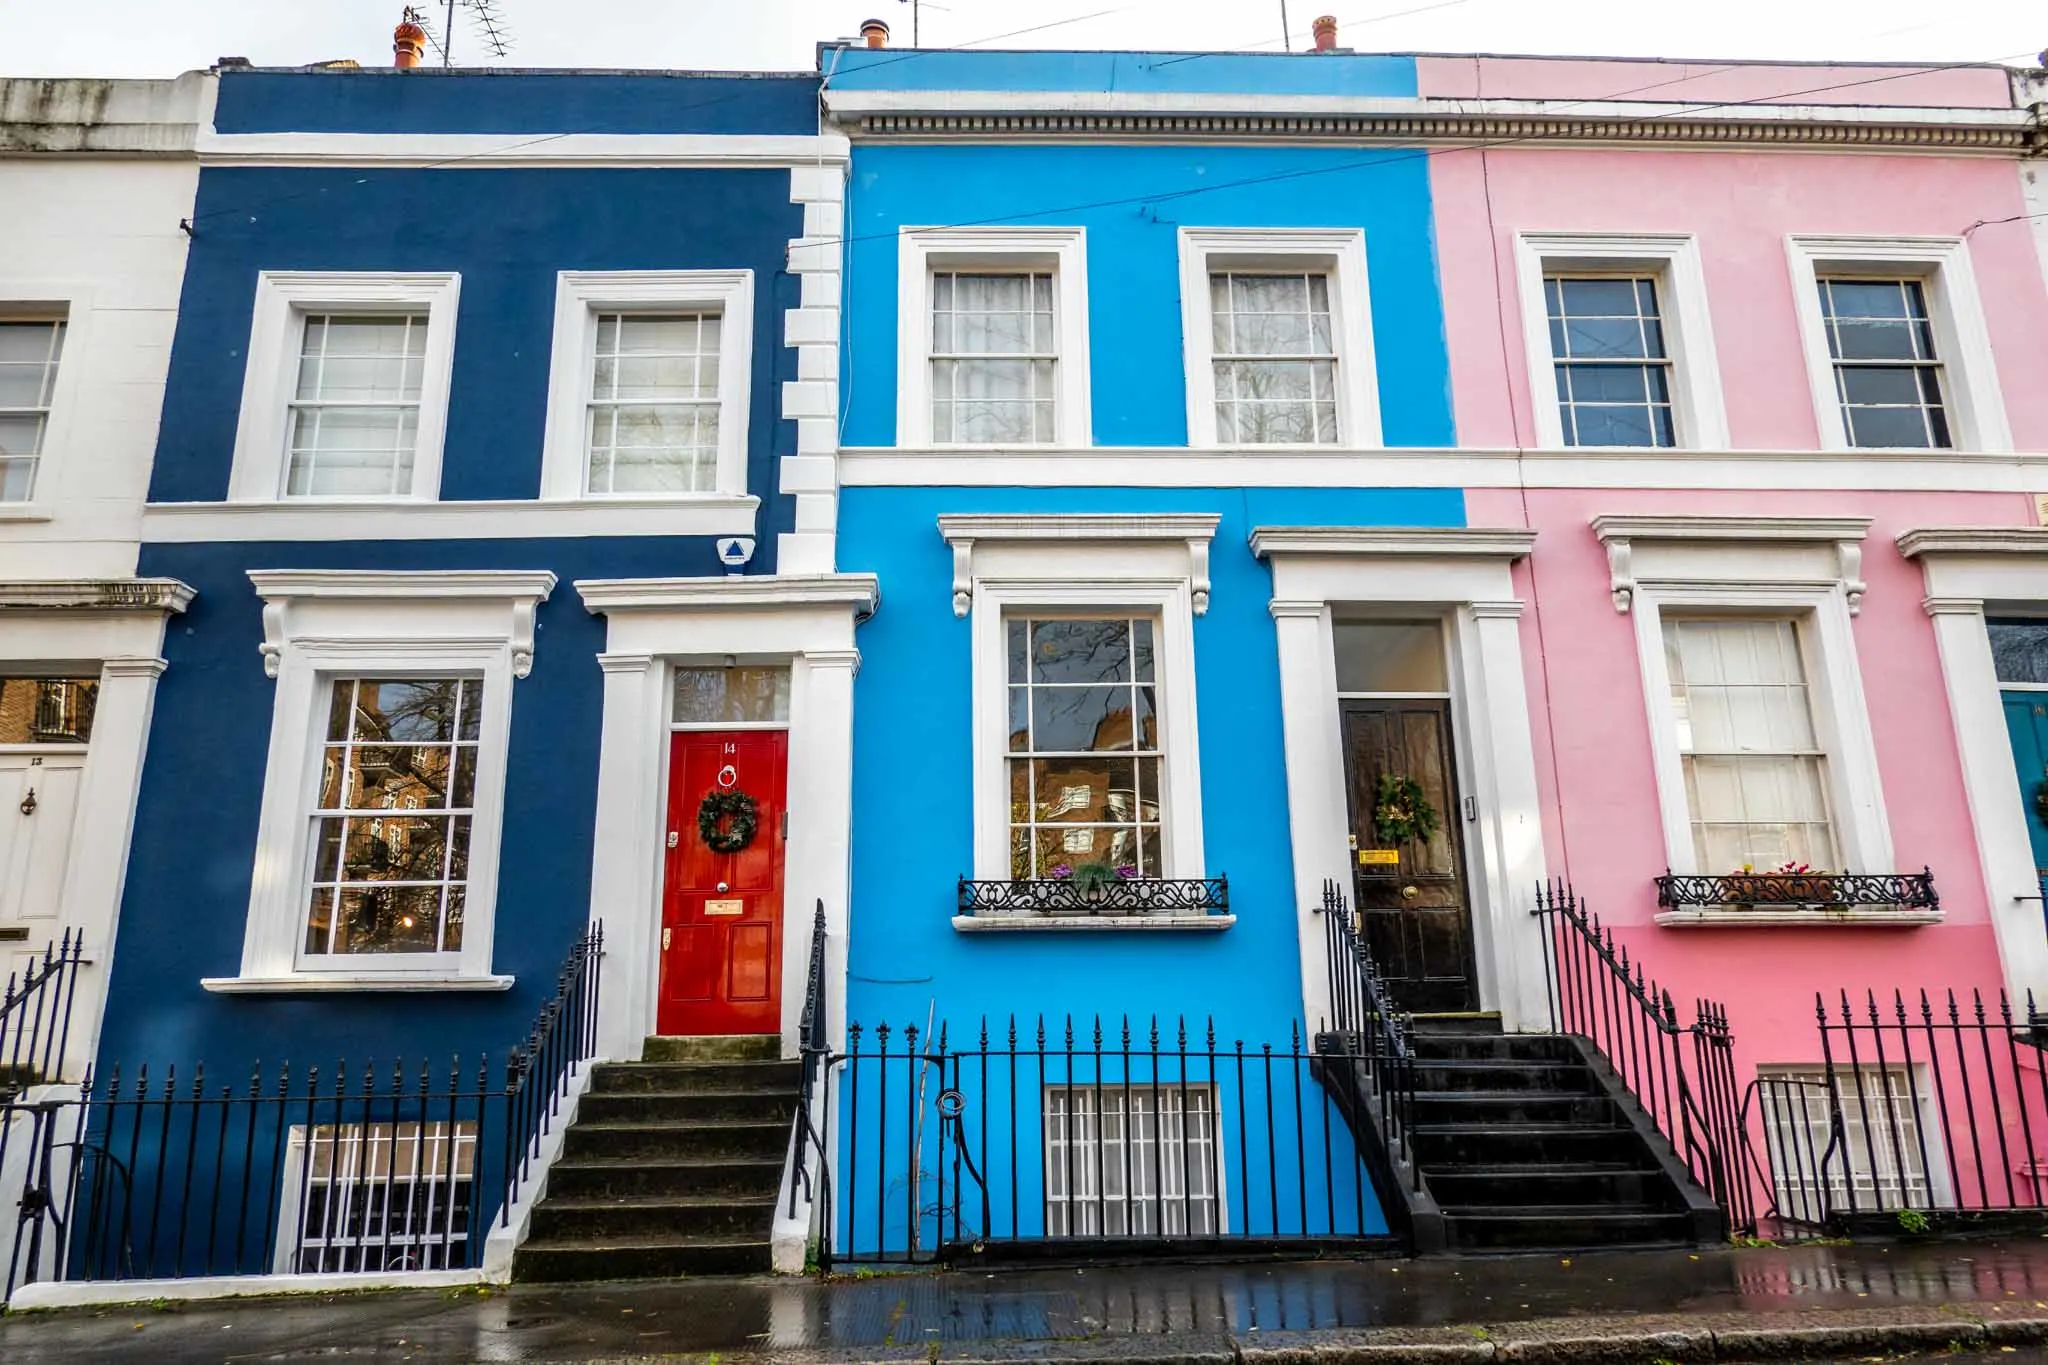 Blue and pink terrace homes in Notting Hill, London